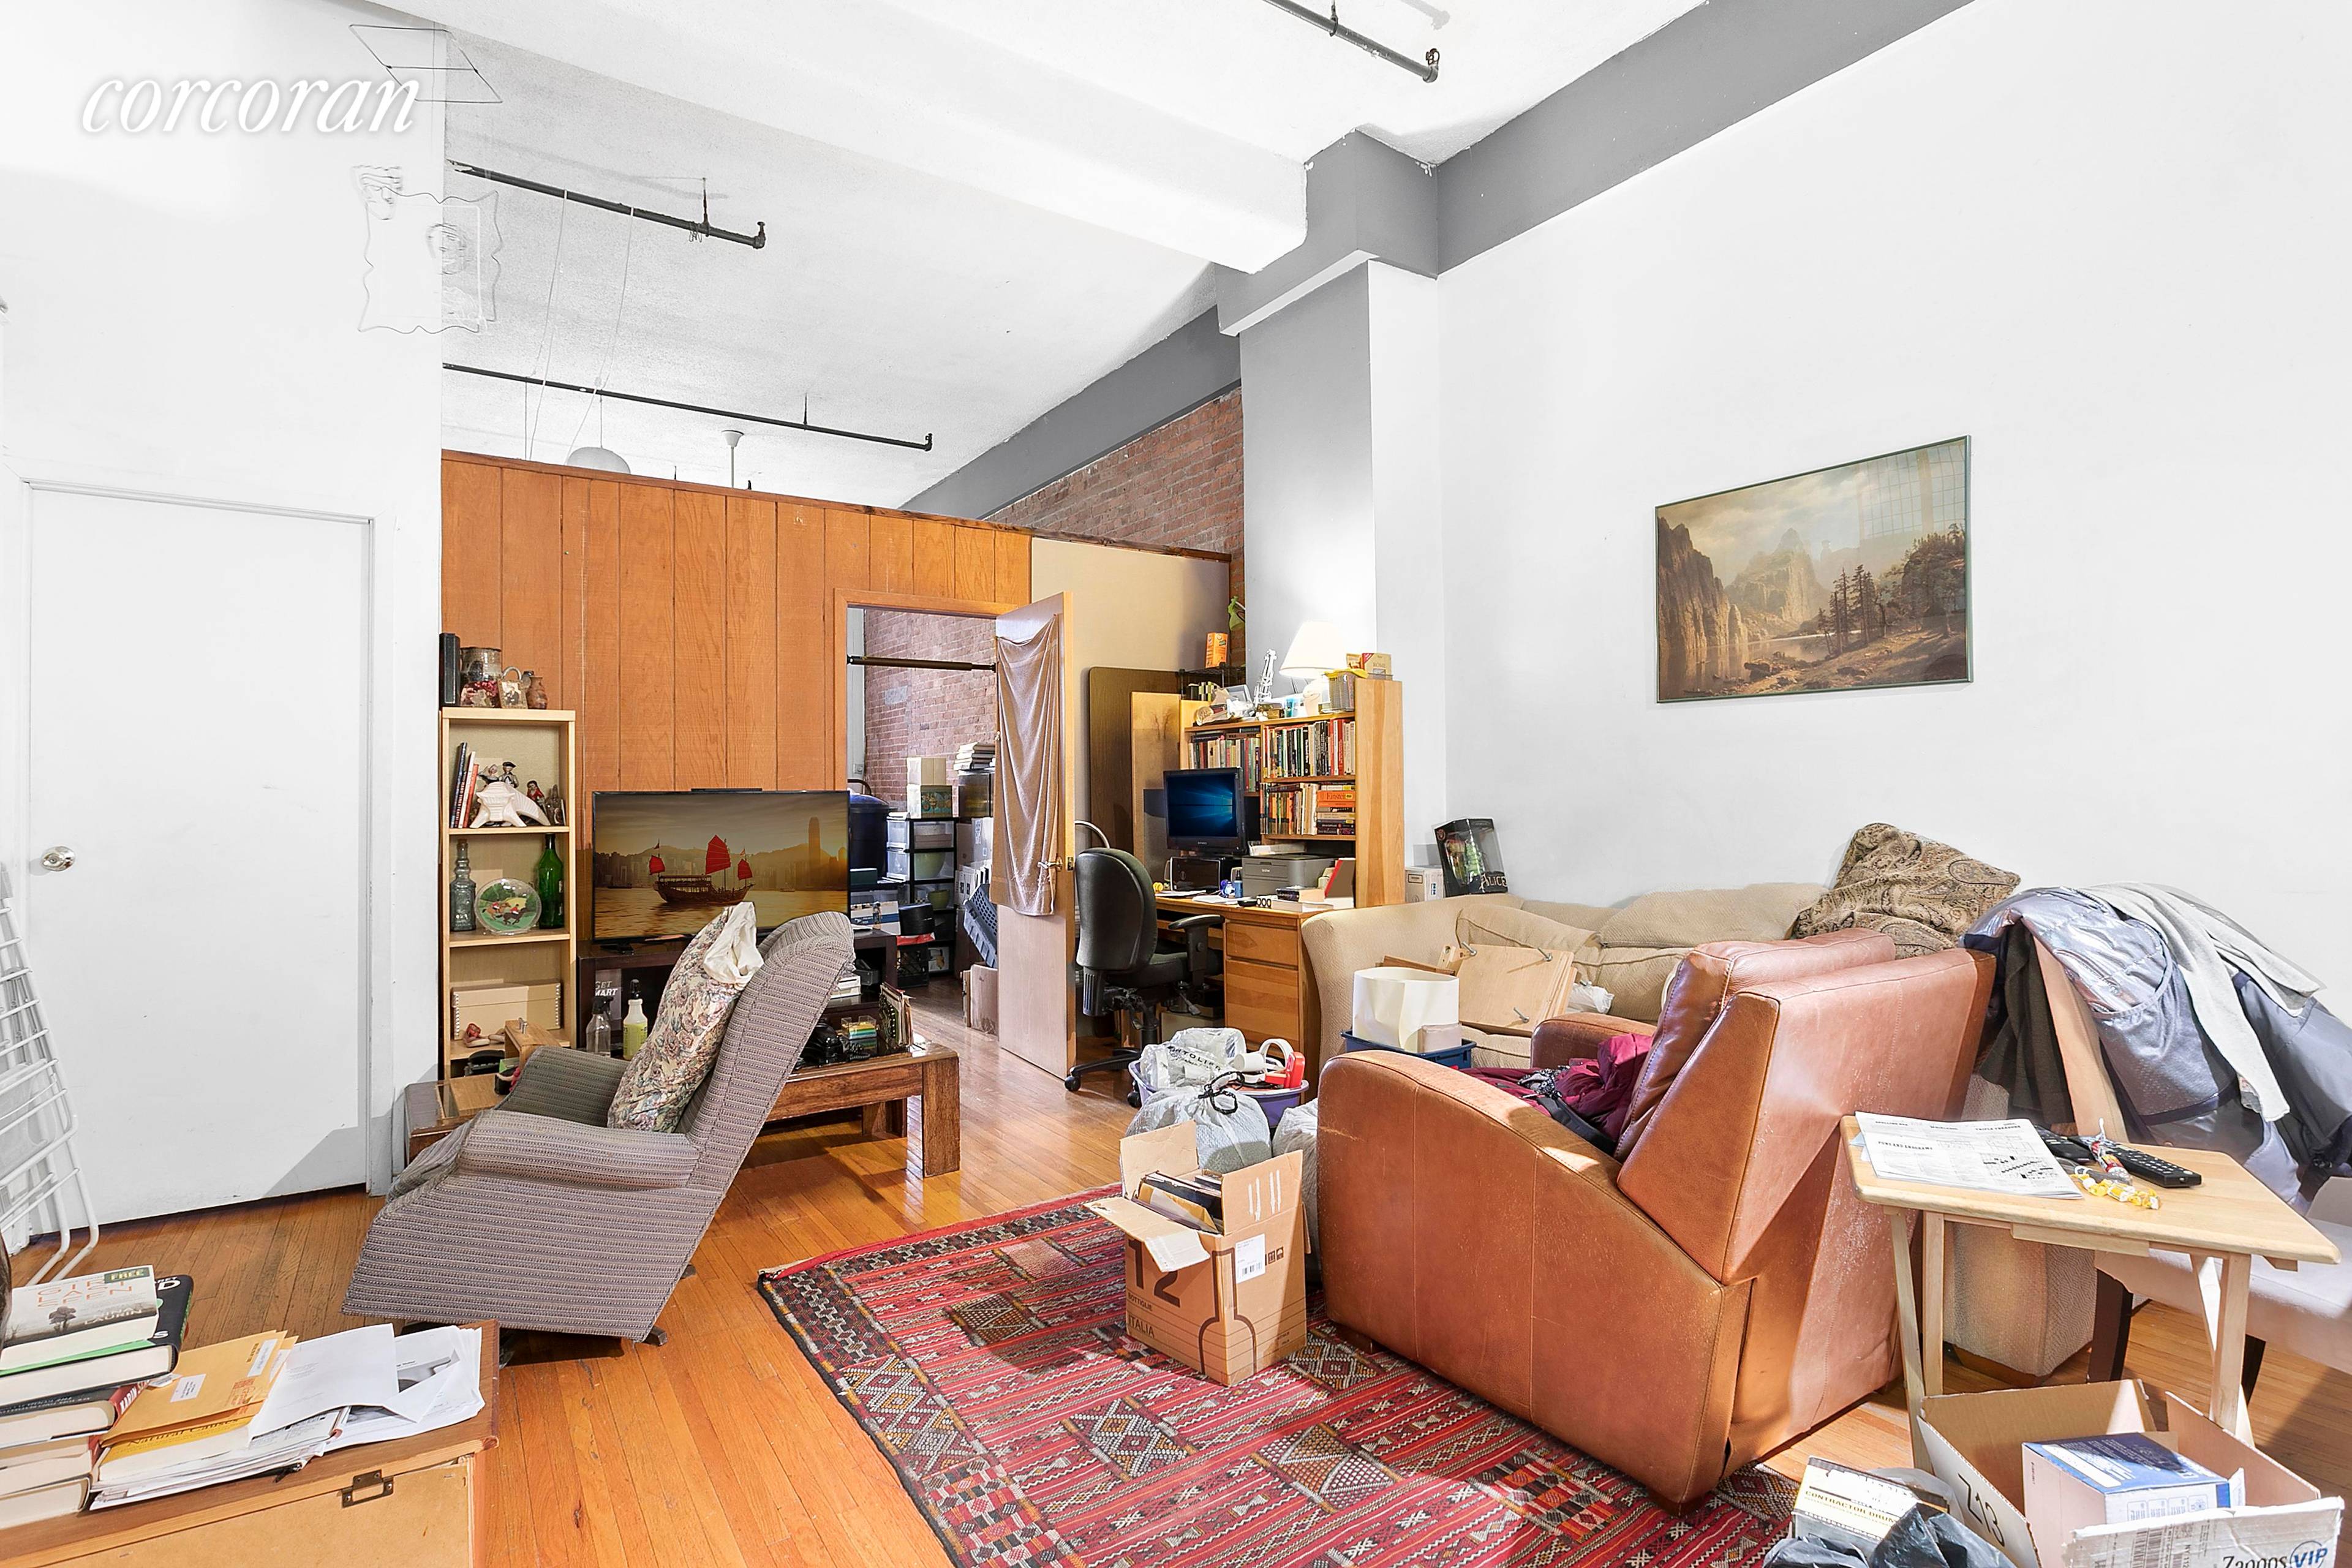 Incredible Sun Filled Loft with massive Ceilings in Boerum Hill Cobble Hill.